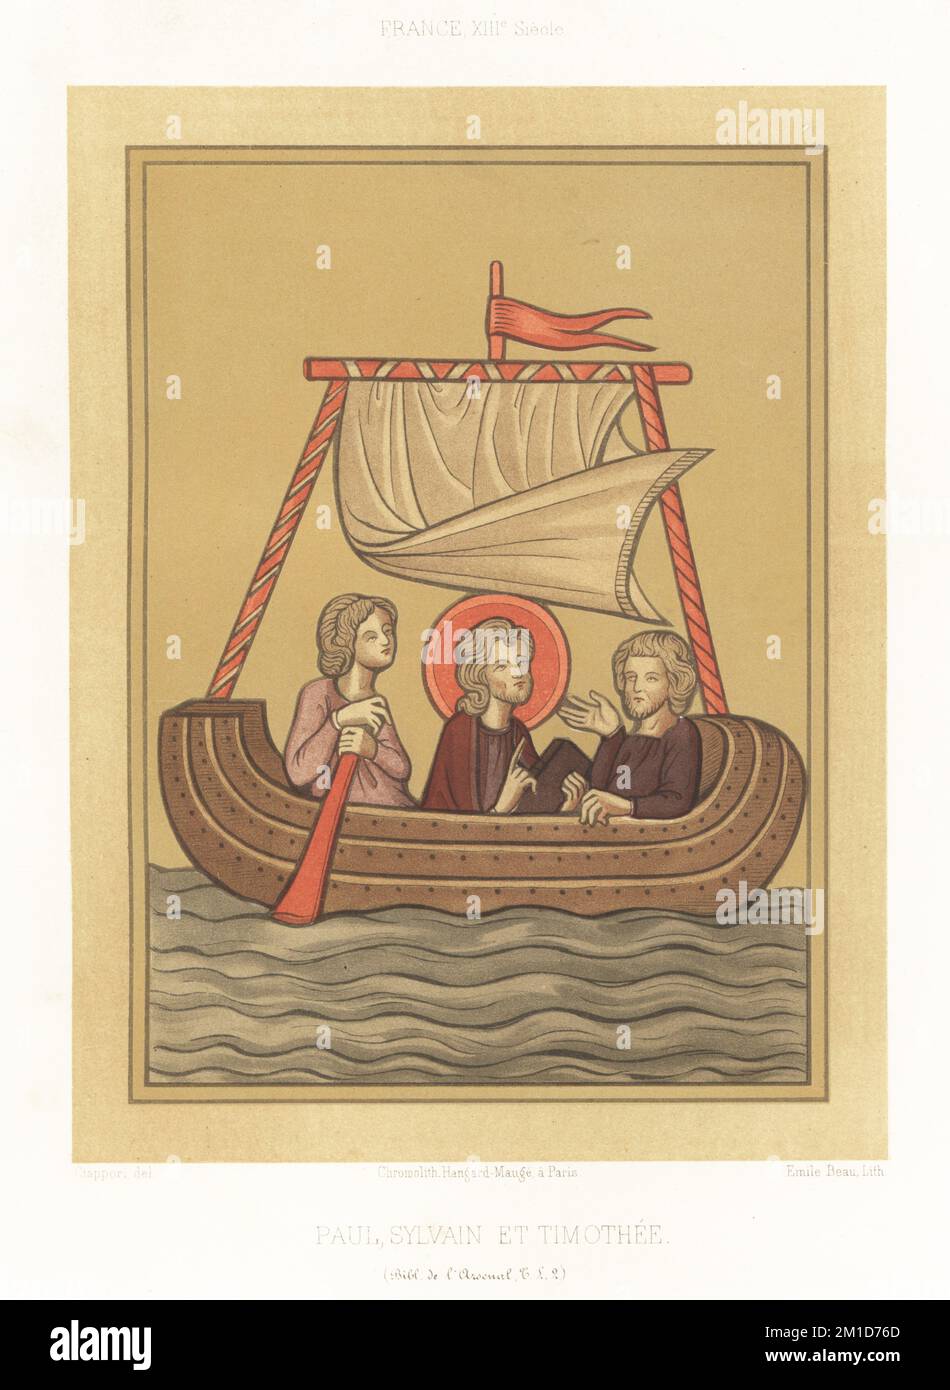 Saint Paul in halo with Silas and Timothy on a small sailboat with a single mast, sail and rudder. Paul, Sylvain et Timothee, From the Book of Thessalonicans in a manuscript Bible, MS T.L. 2, Bibliotheque de l'Arsenal, 13th century. France, XIIIe Siecle. Chromolithograph by Emile Beau after an illustration by Claudius Joseph Ciappori from Charles Louandre’s Les Arts Somptuaires, The Sumptuary Arts, Hangard-Mauge, Paris, 1858. Stock Photo